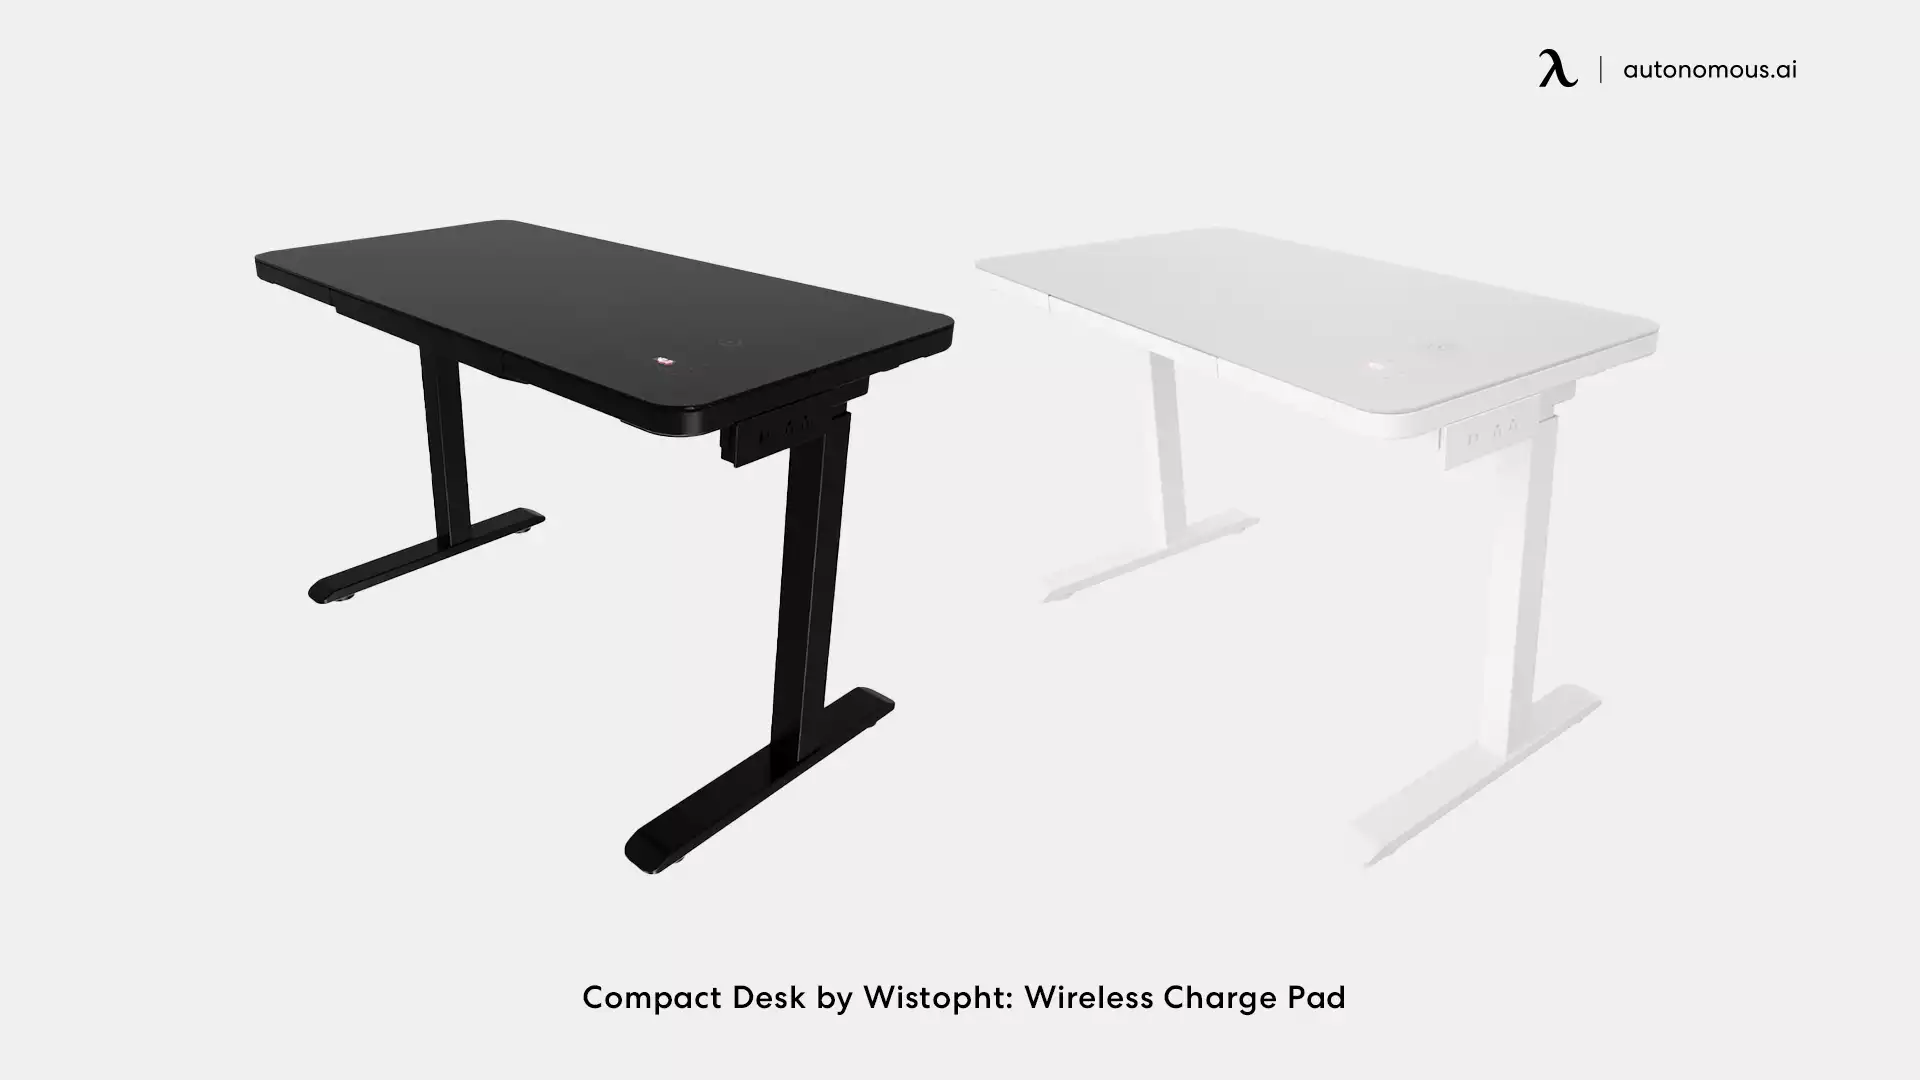 Compact Desk by Wistopht – Wireless Charge Pad